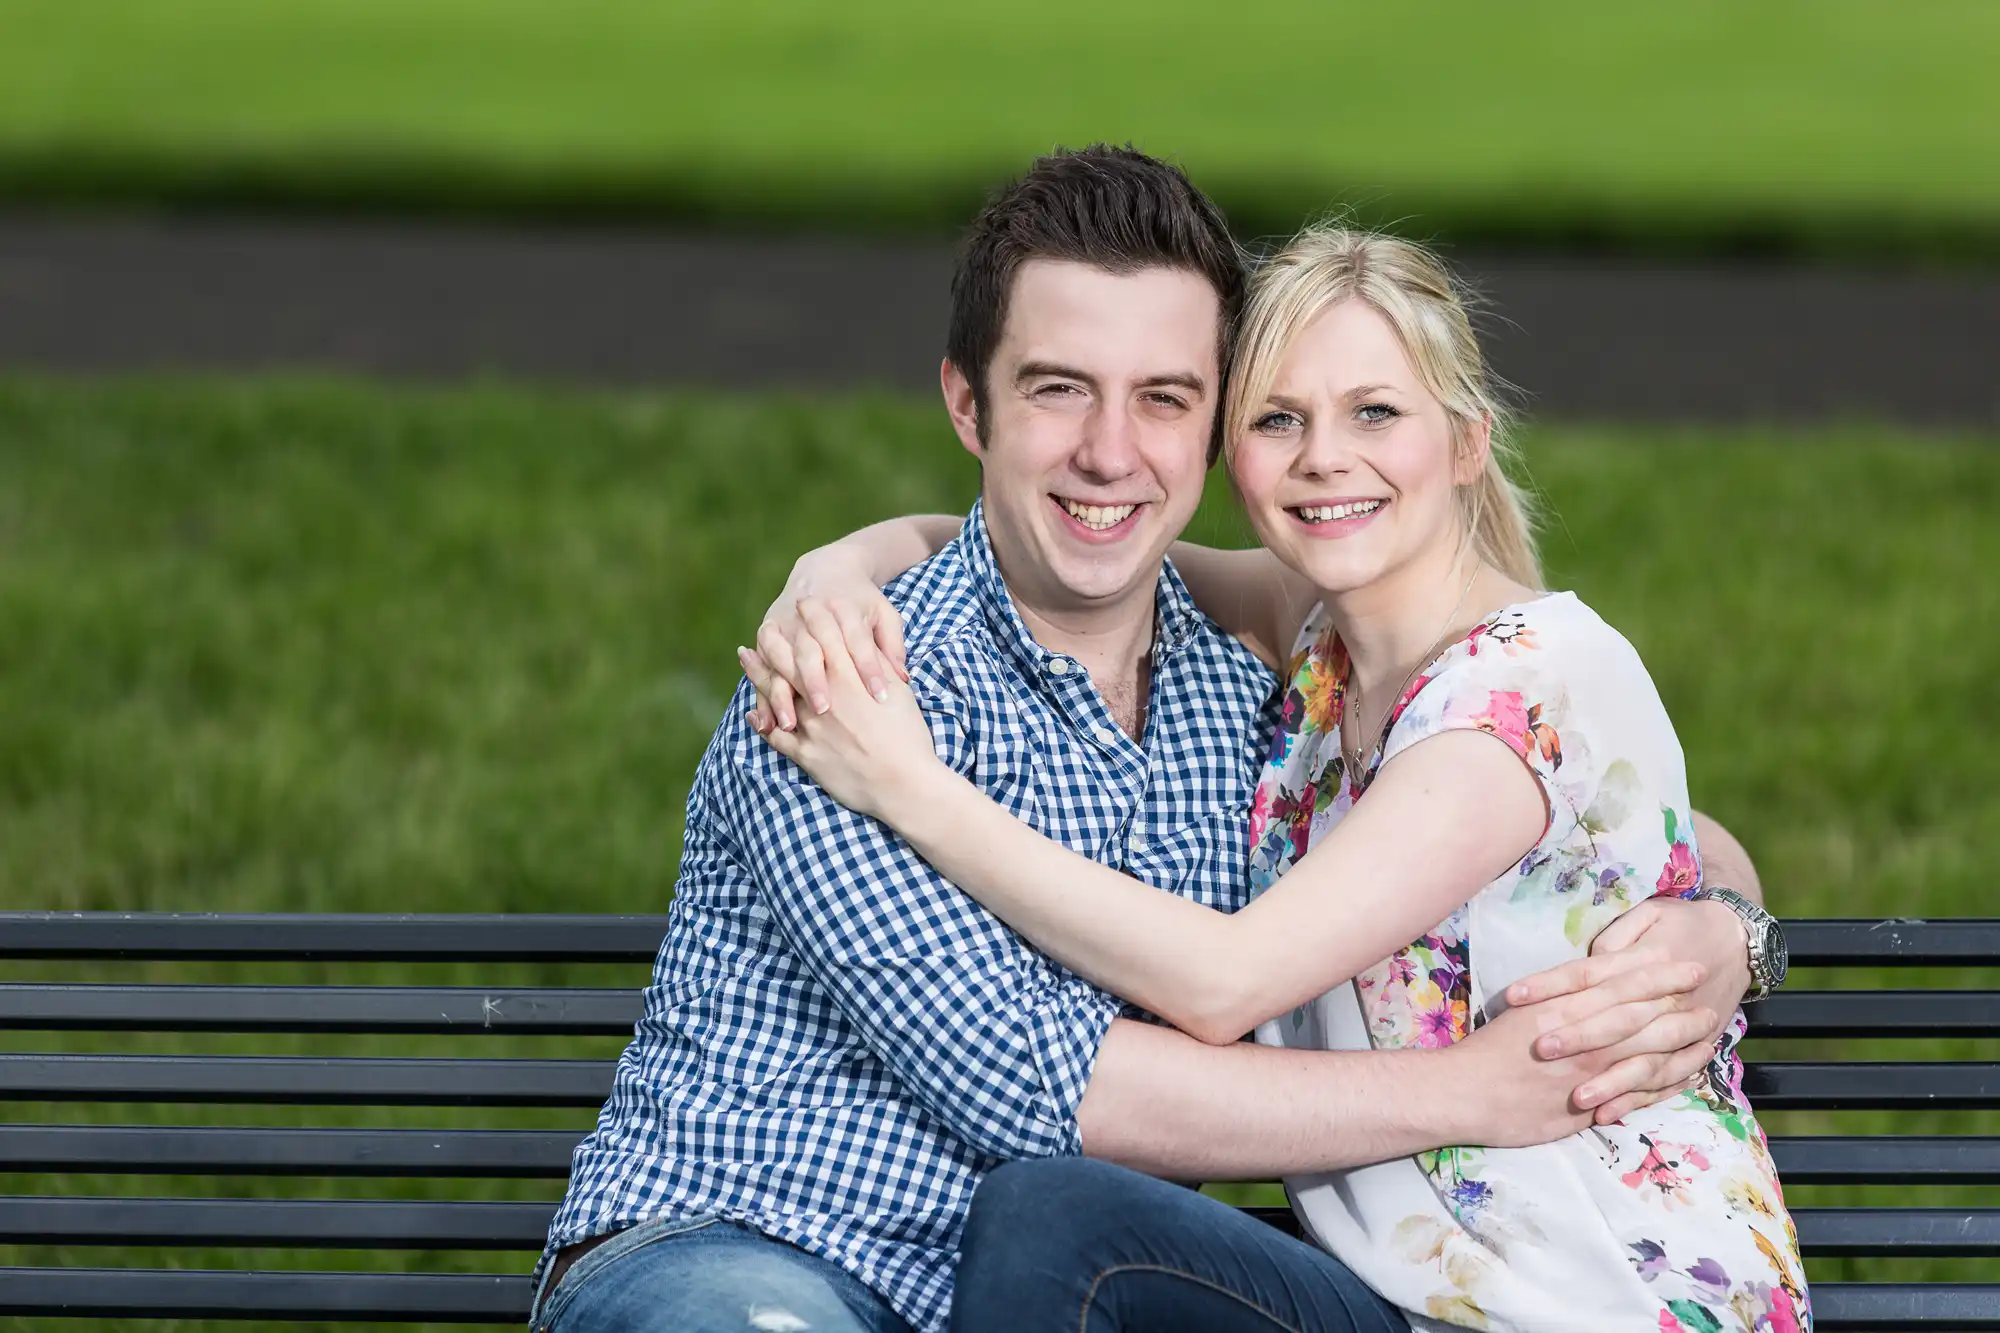 A smiling couple sitting closely together on a park bench, embracing each other against a blurred green grass background.